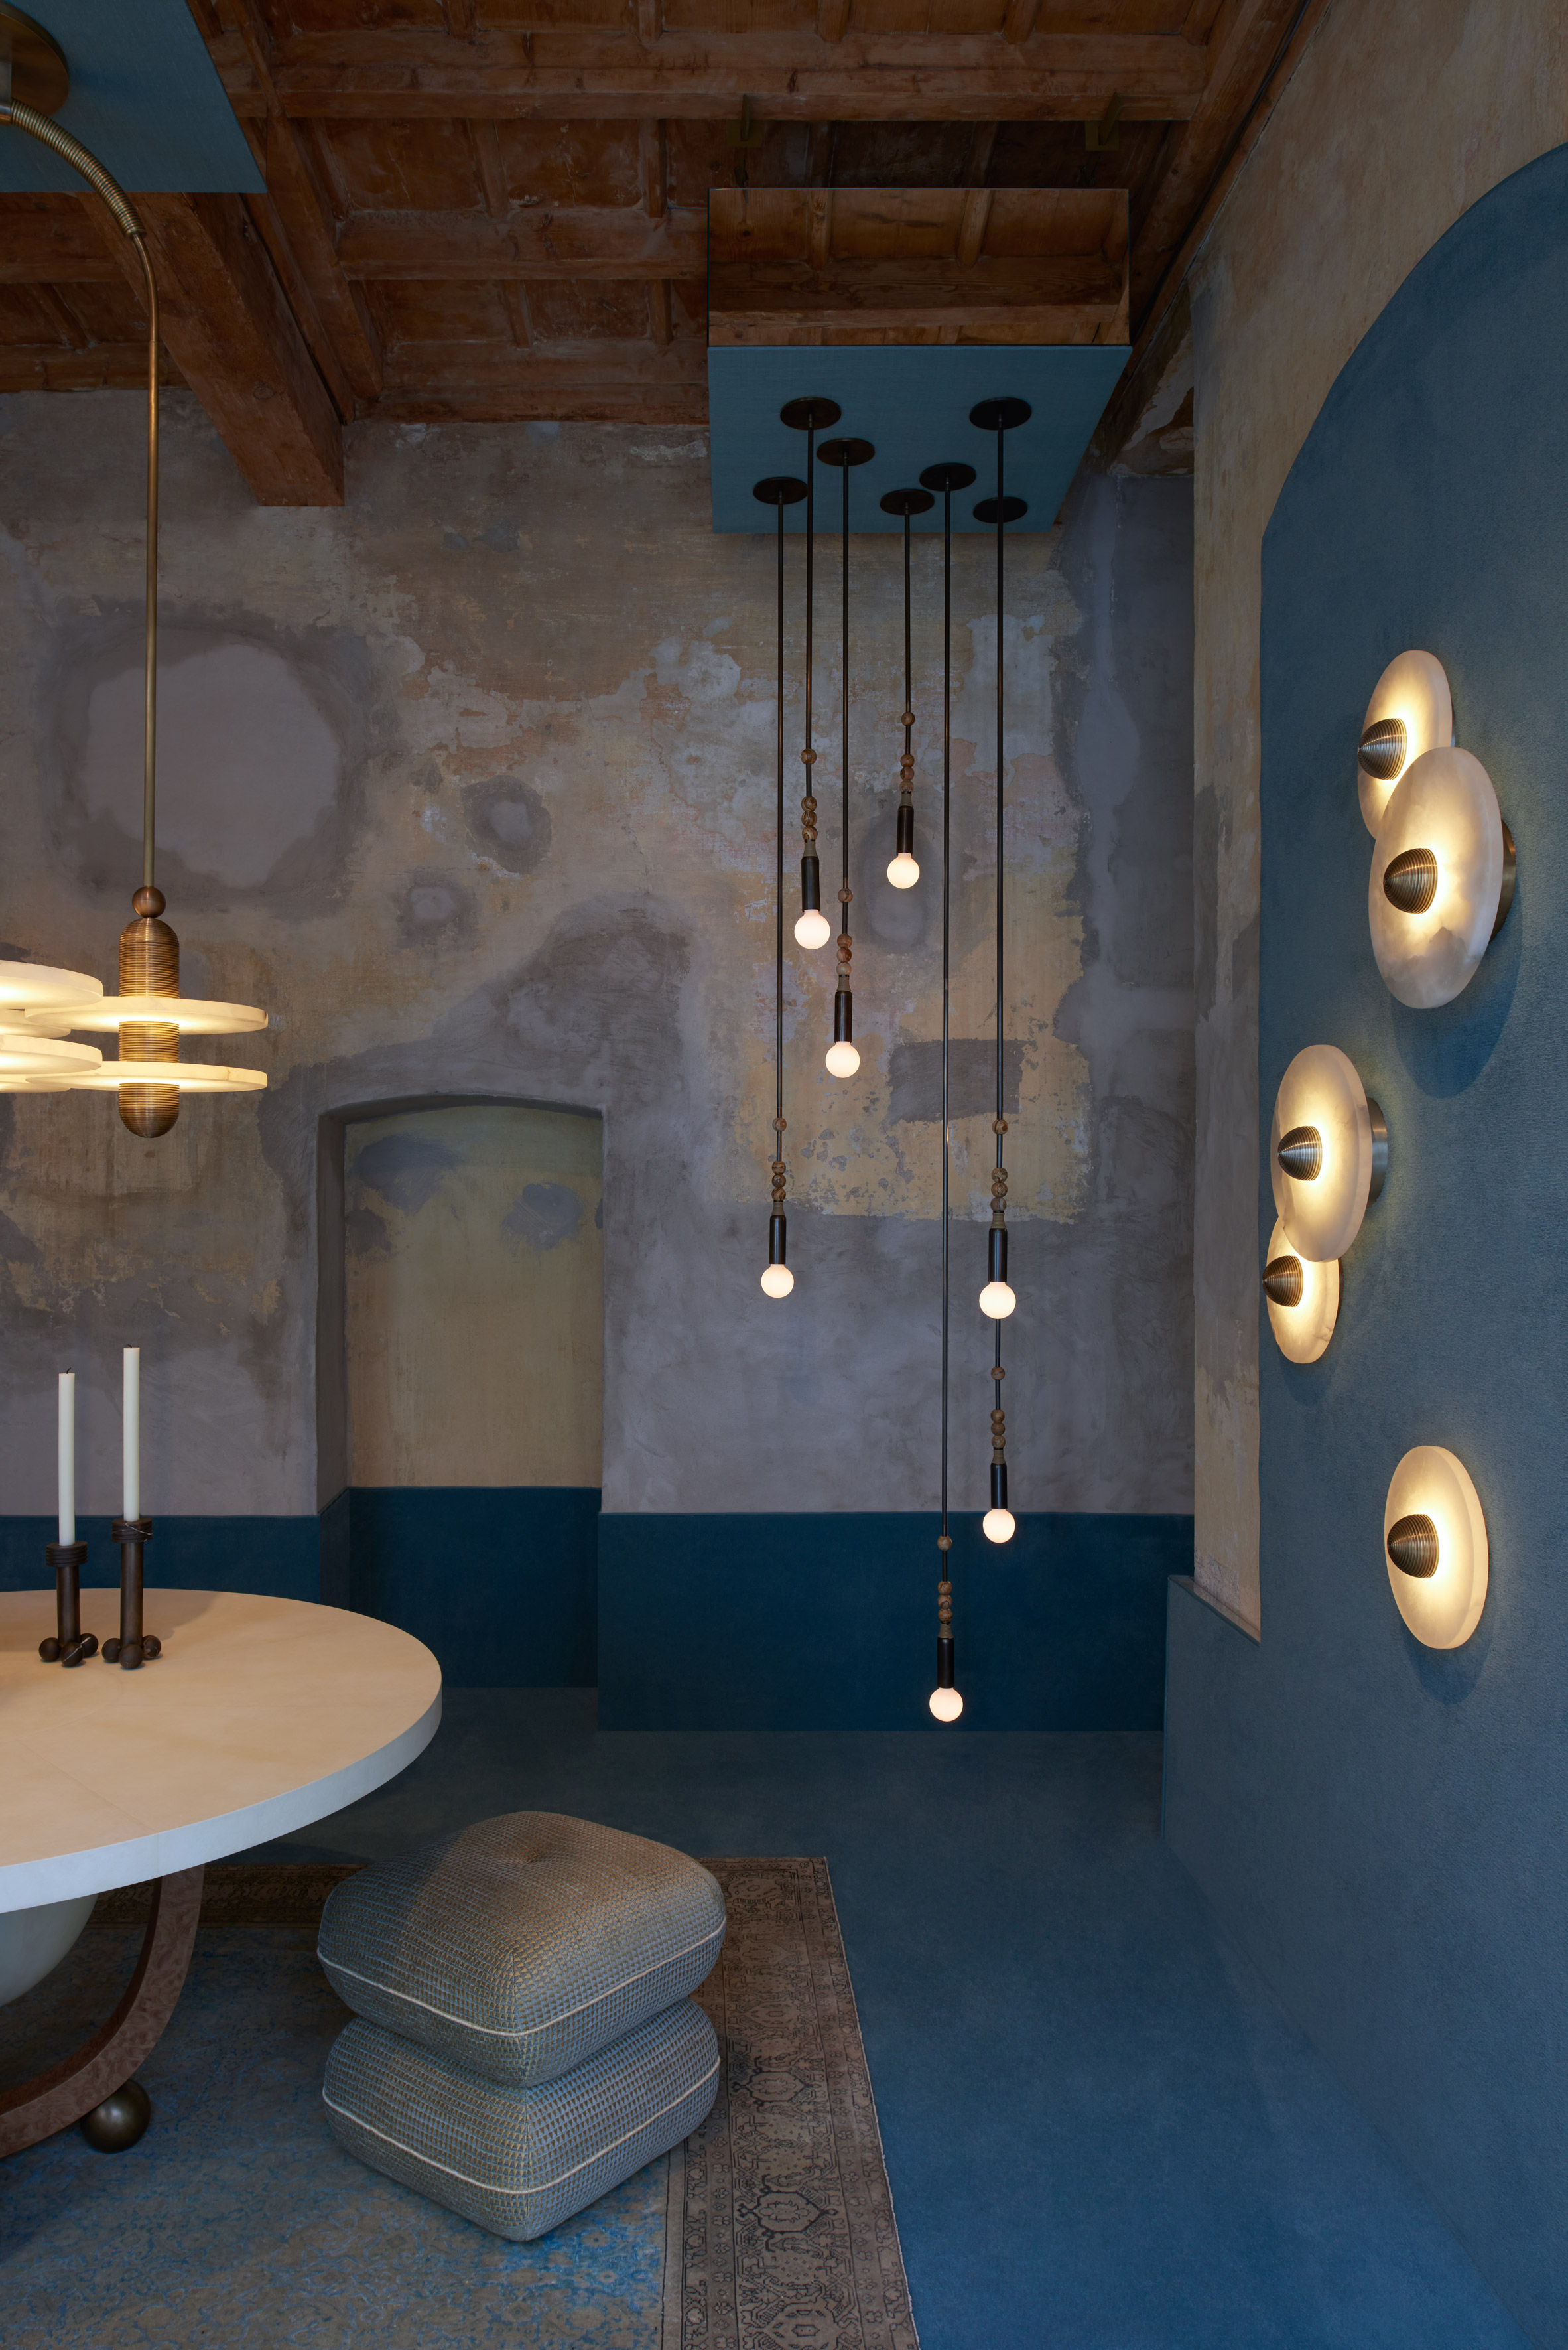 Apparatus draws on Persian influences for Act III homeware and lighting collection